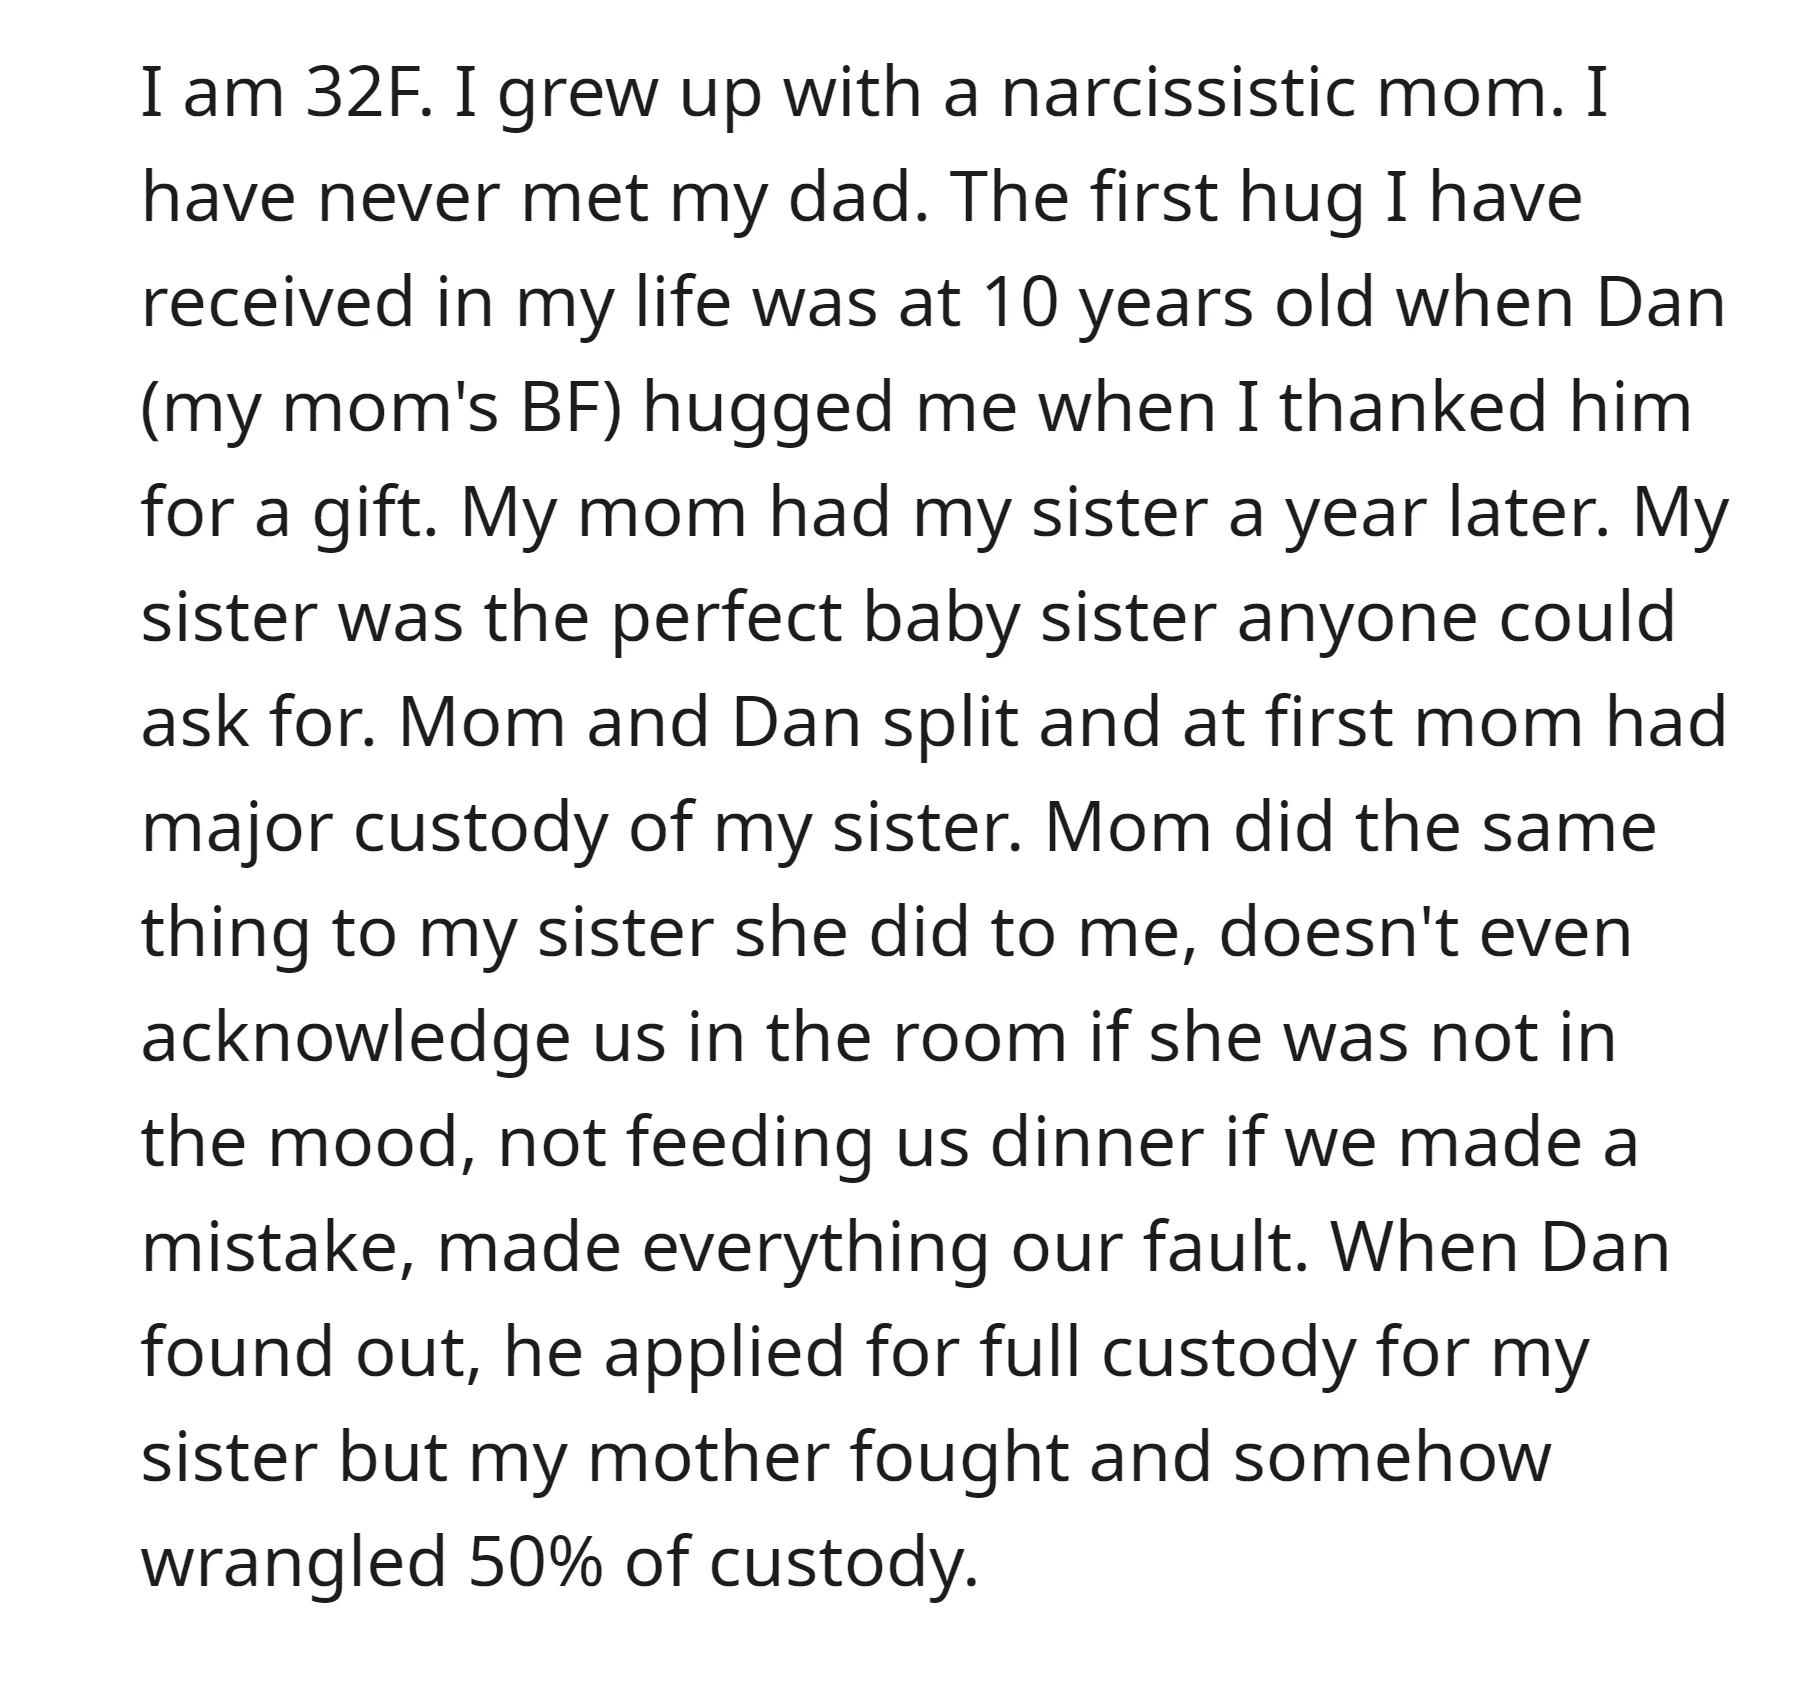 She and her sister experienced neglect and emotional abuse